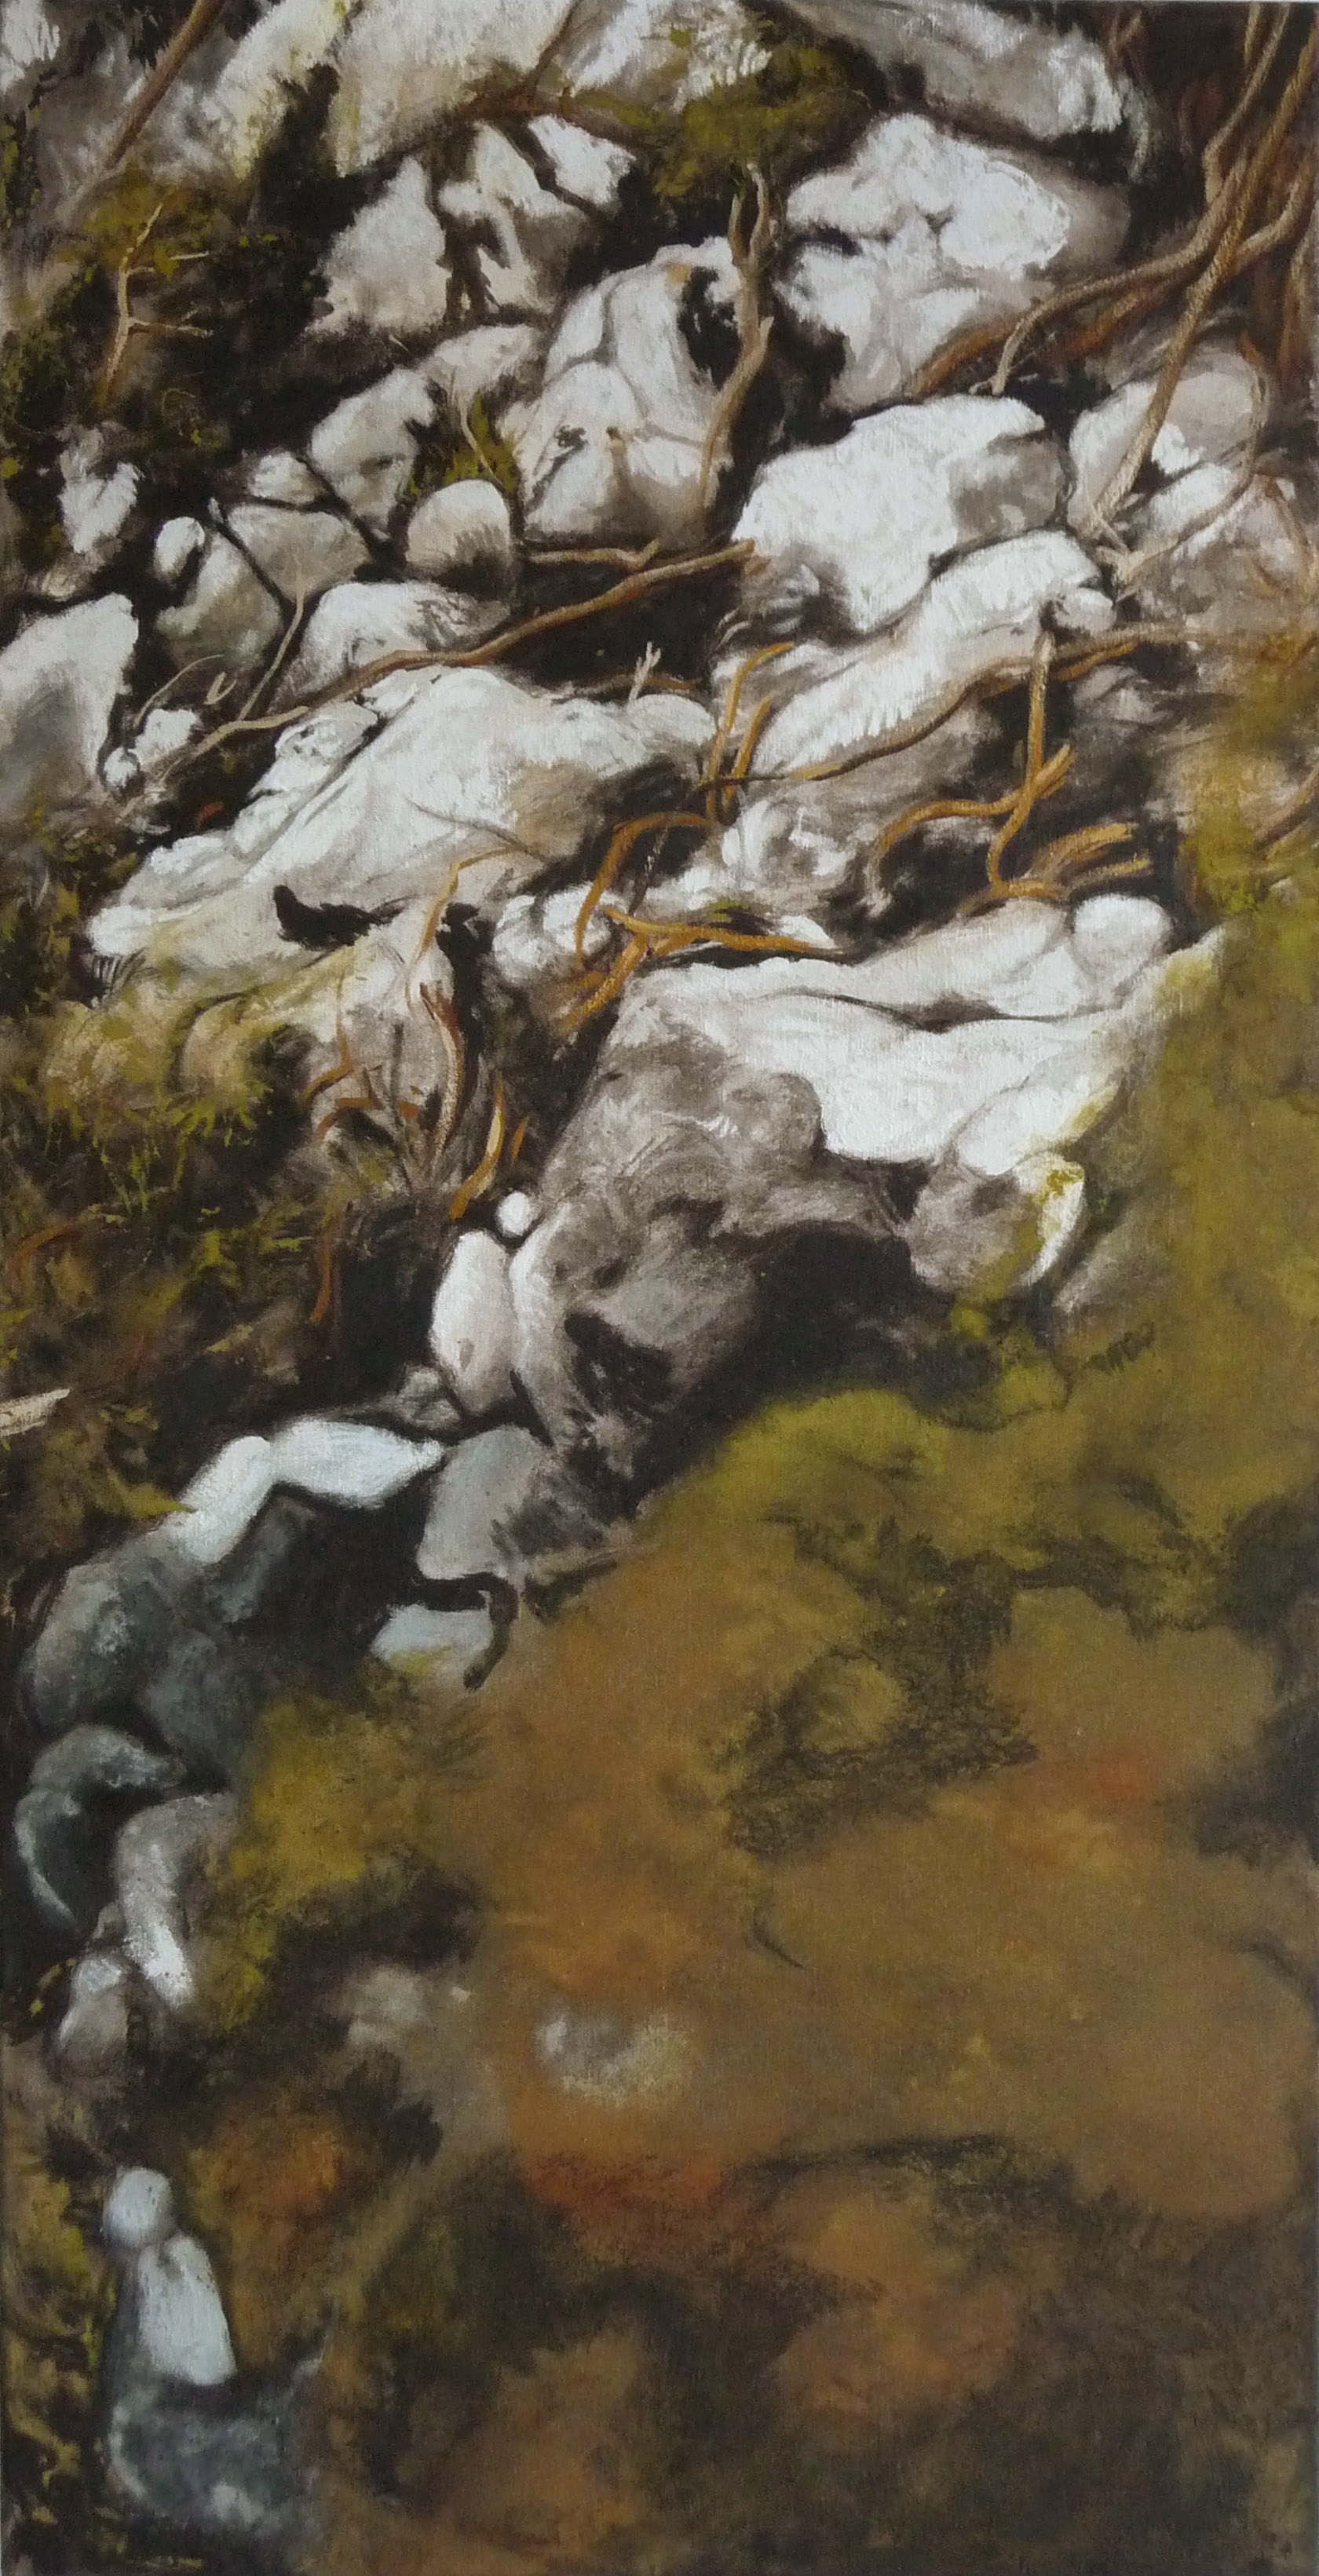 <p><strong><span id="result_box" class="short_text" lang="hr"><span class="">Prva voda <br /></span></span></strong>Punic wax and encaustic on canvas, 50 x 100 cm</p>